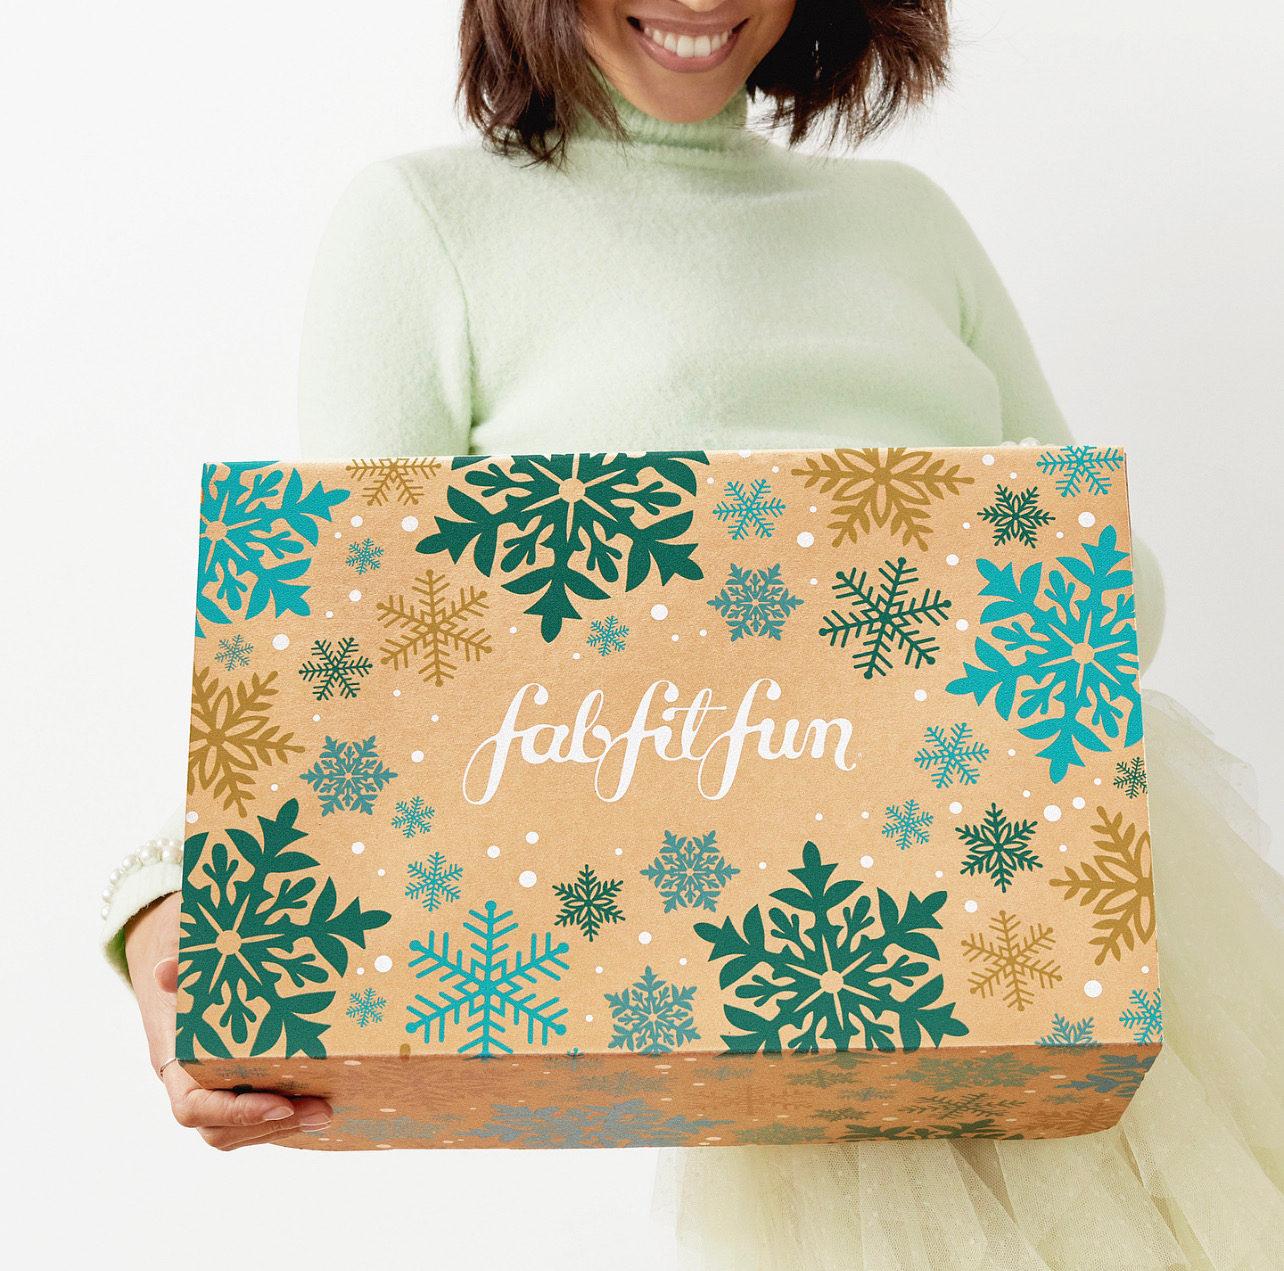 Read more about the article FabFitFun Box Price Increase Details and Winter 2022 Box Updates